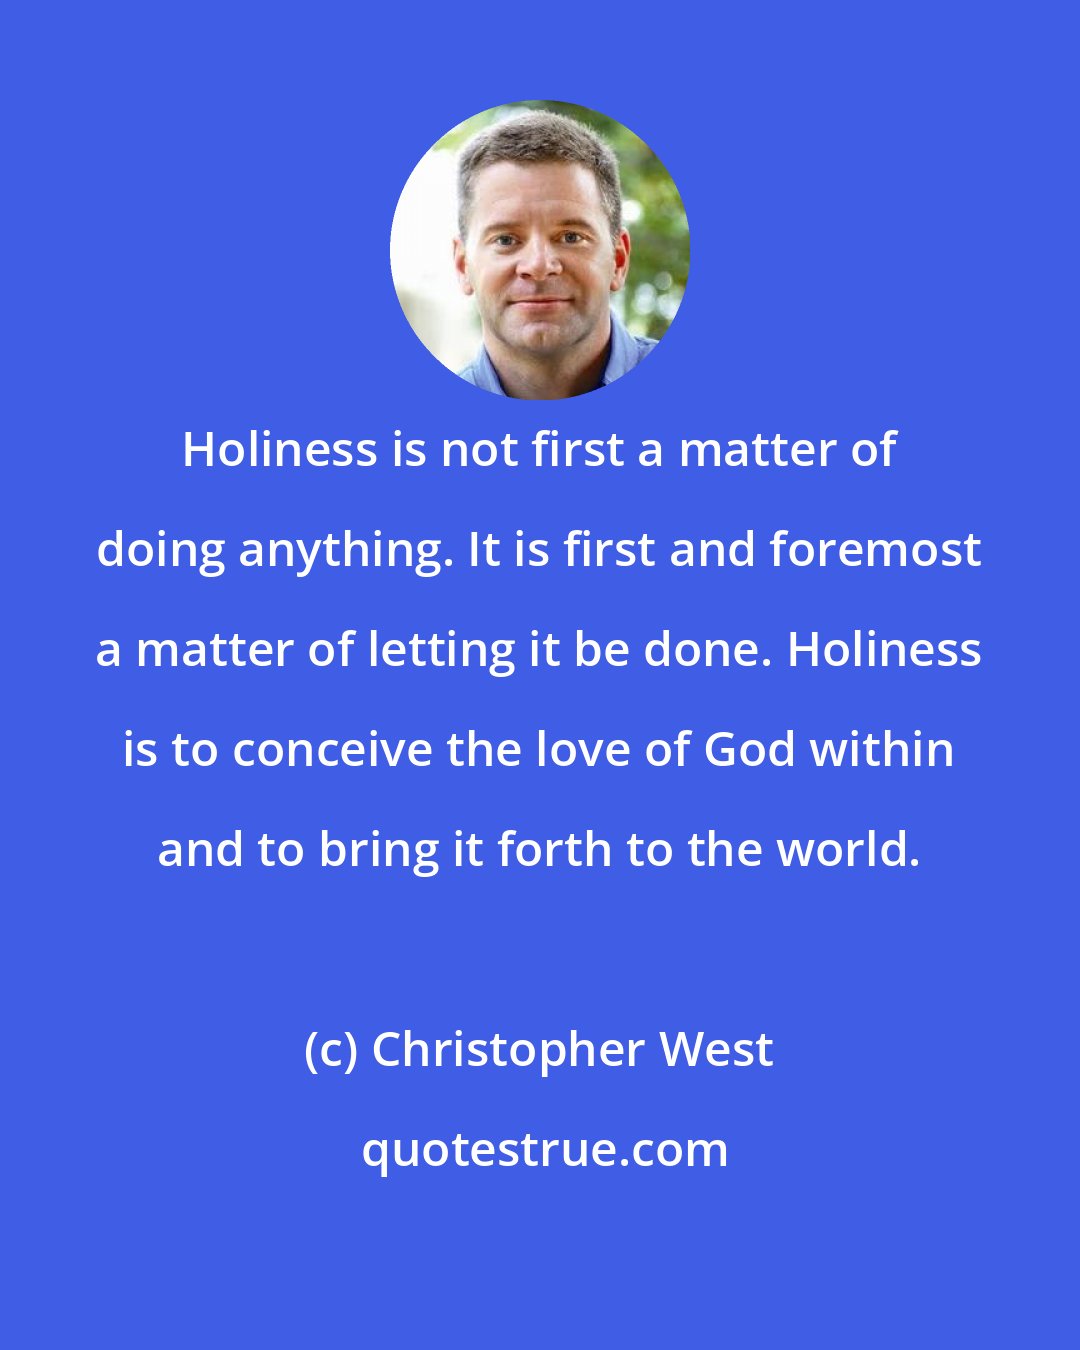 Christopher West: Holiness is not first a matter of doing anything. It is first and foremost a matter of letting it be done. Holiness is to conceive the love of God within and to bring it forth to the world.